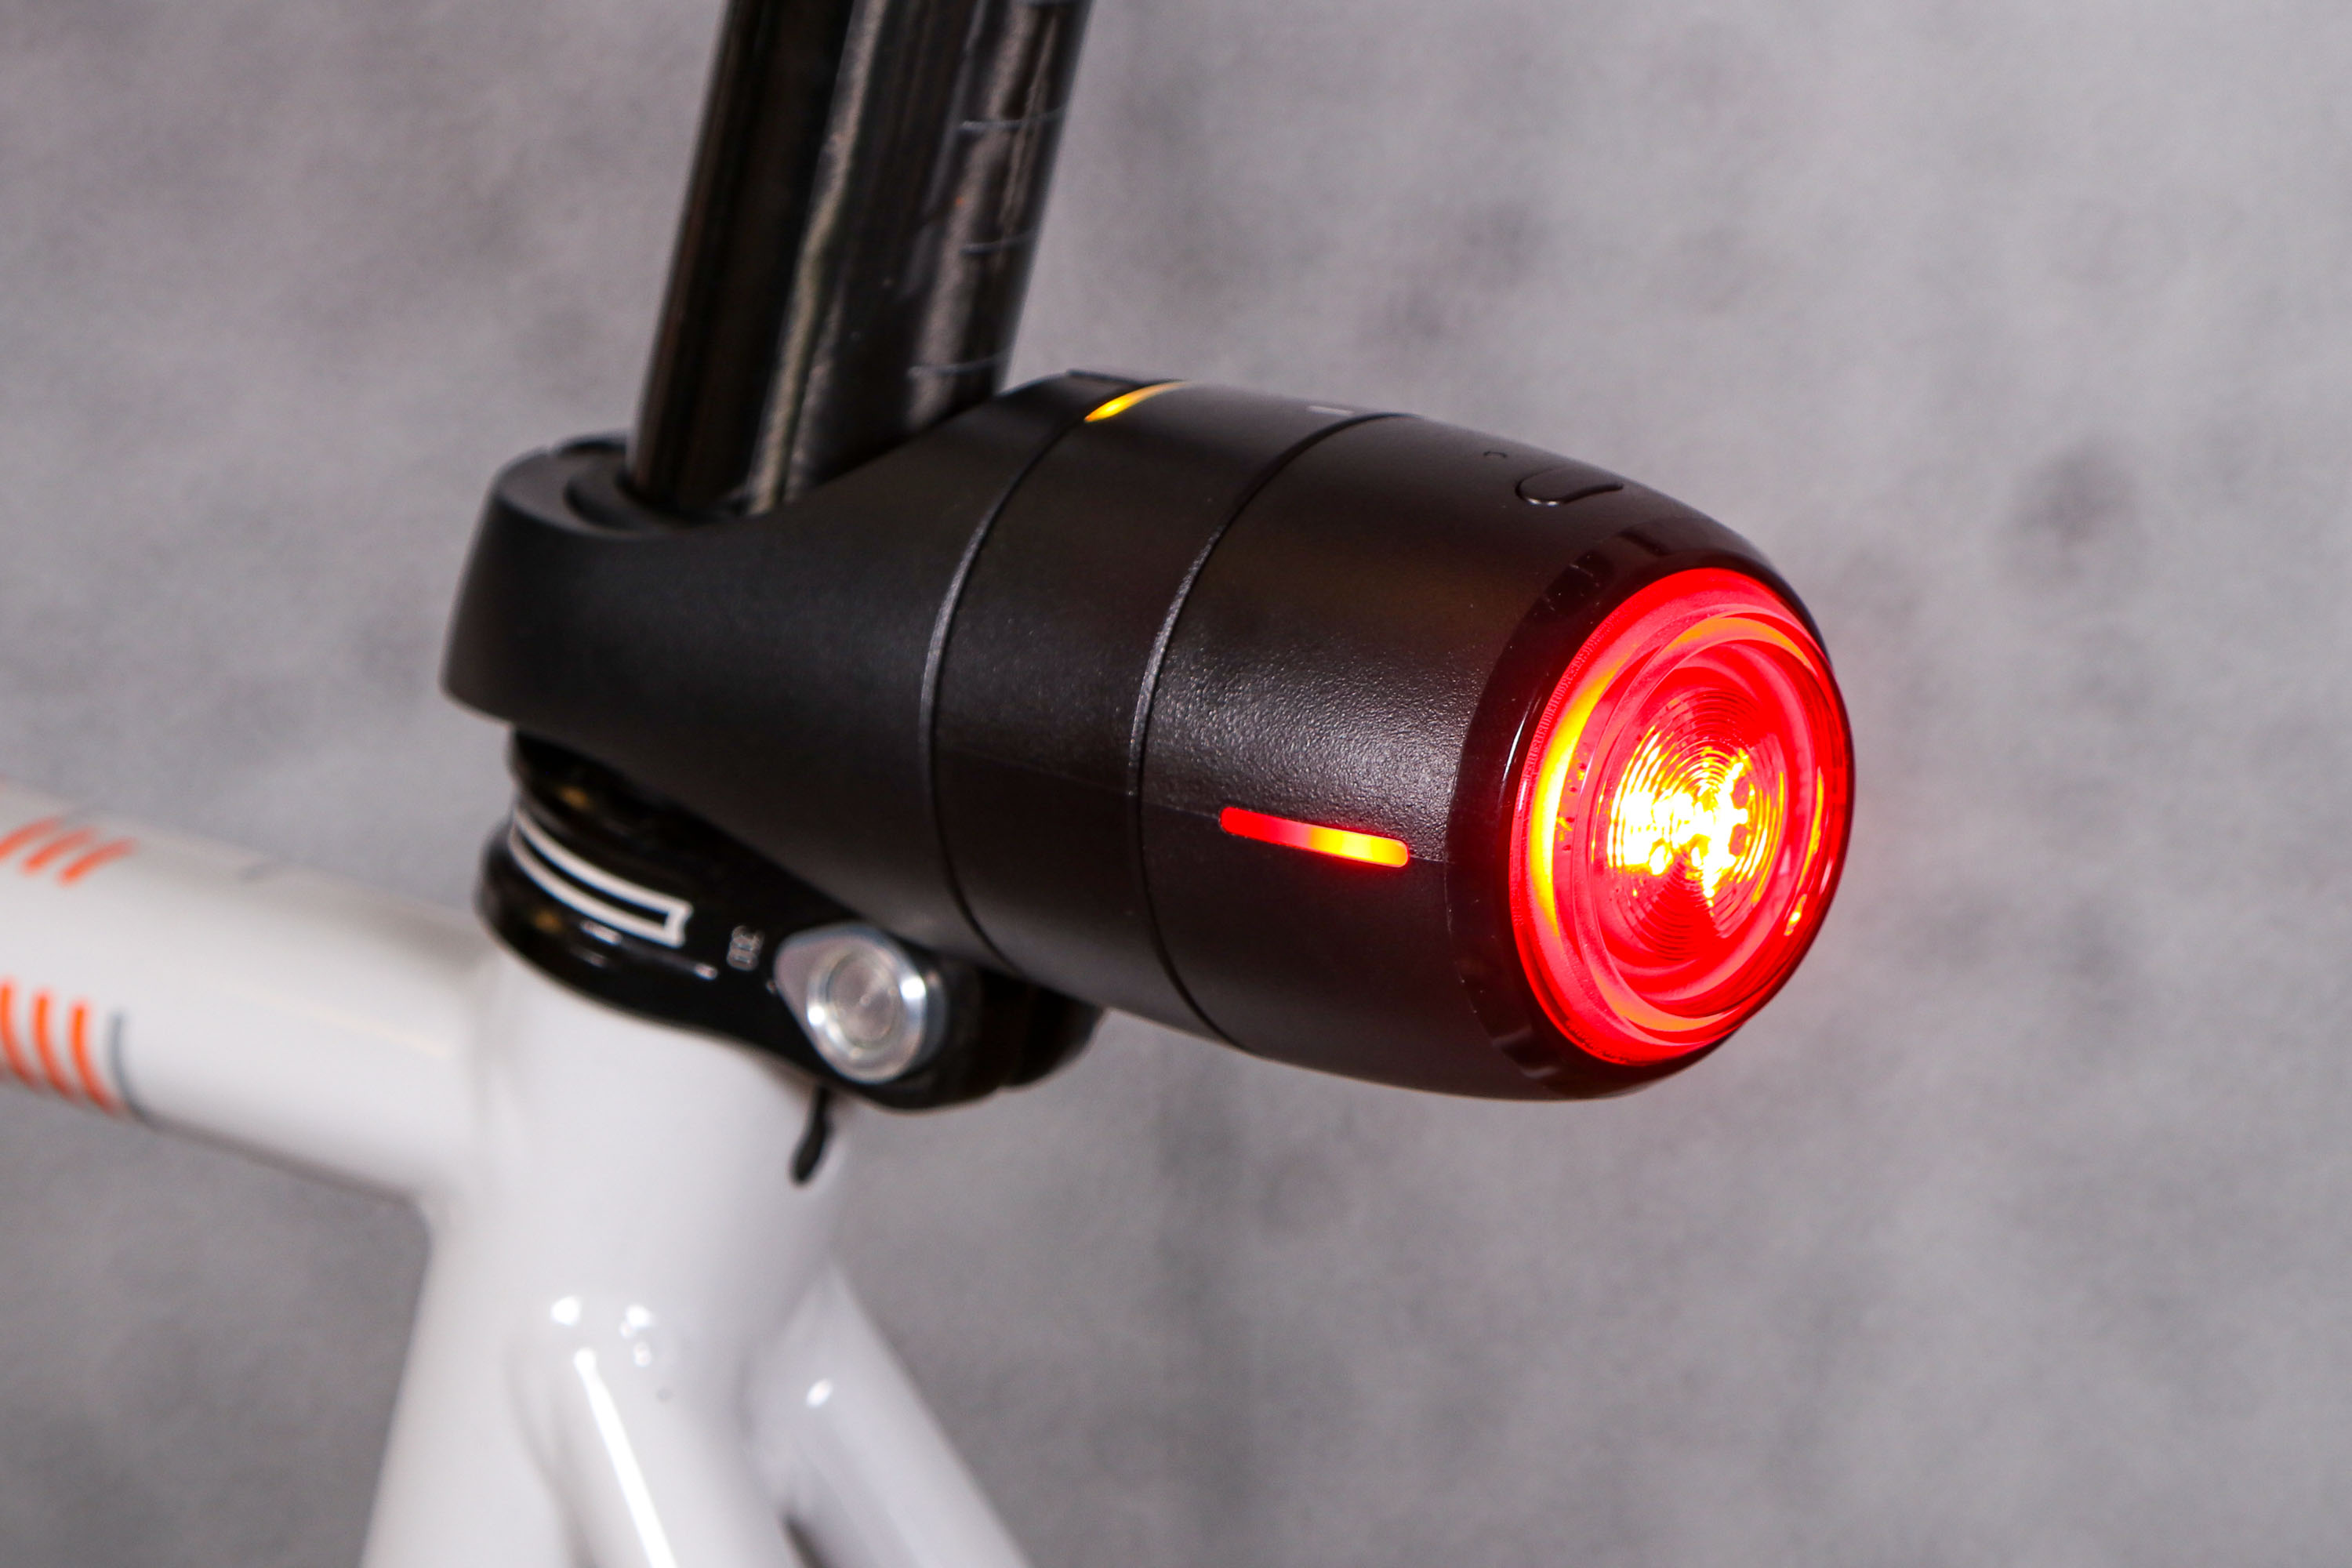 Mexico out of service remaining Review: Vodafone Curve bike light & GPS tracker | road.cc